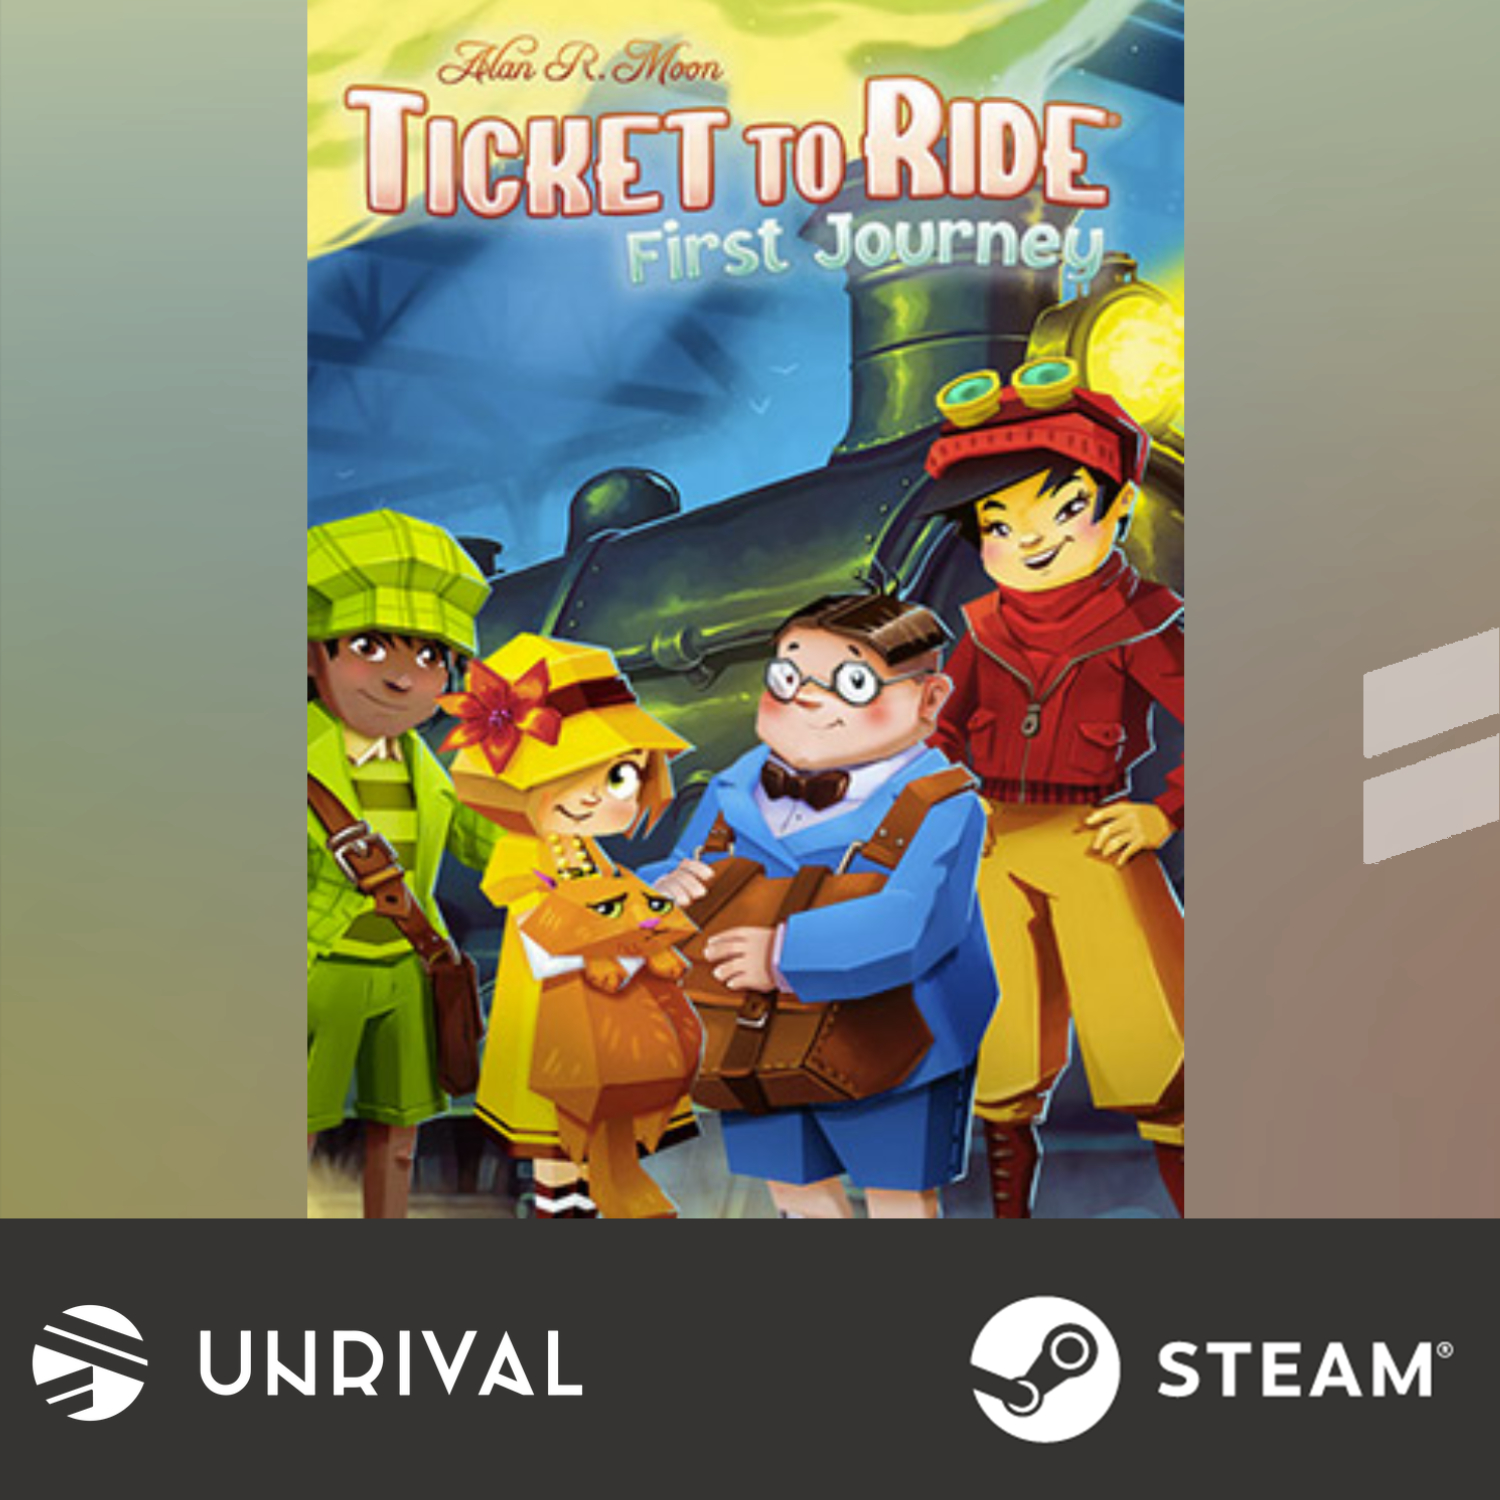 Ticket to Ride: First Journey PC Digital Download Game (Multiplayer) - Unrival